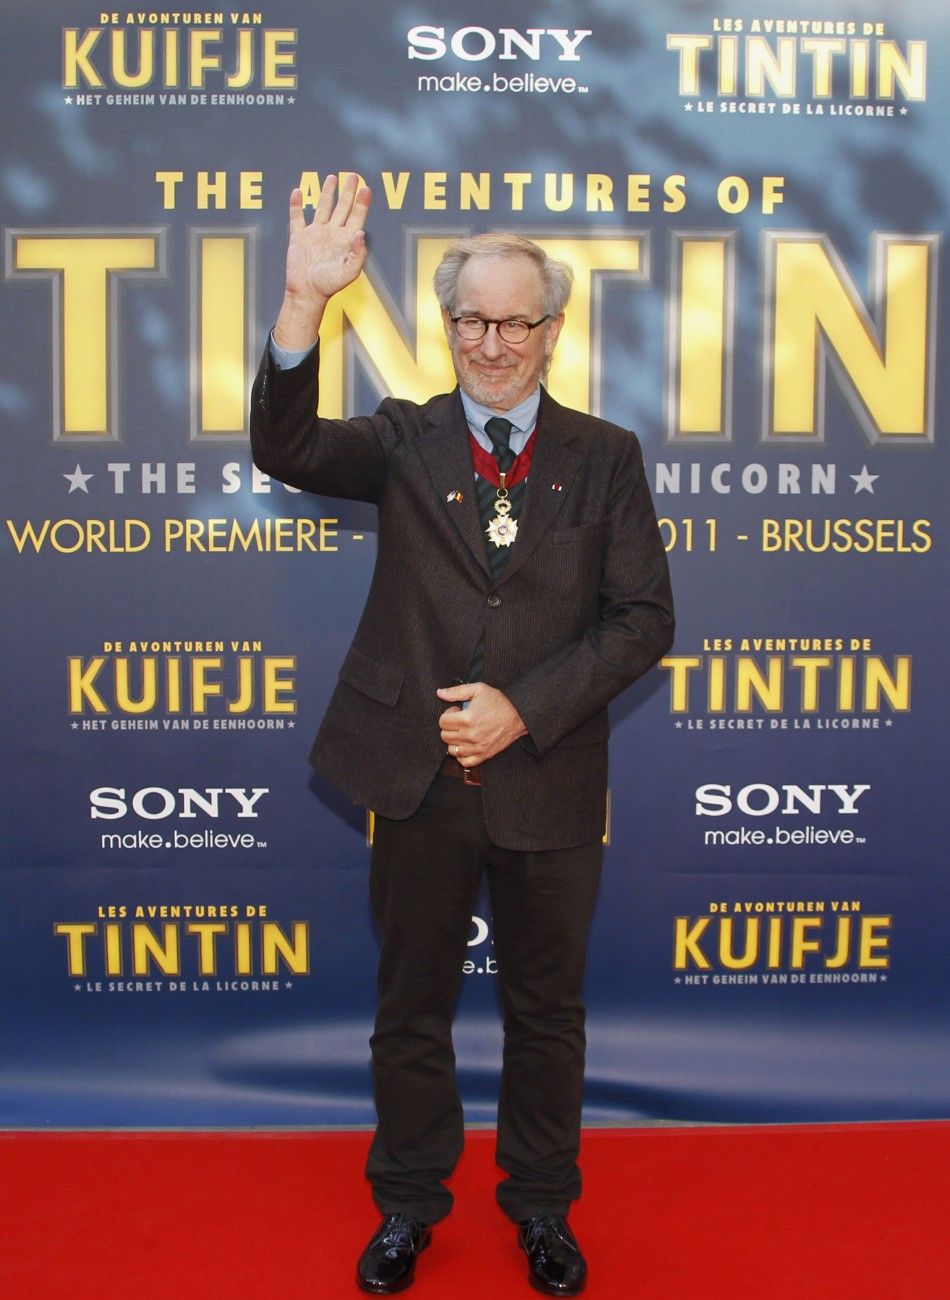 Director Steven Spielberg poses during a photocall ahead of the world premiere of the movie quotThe Adventures Of Tintin The Secret of The Unicornquot in Brussels October 22, 2011.